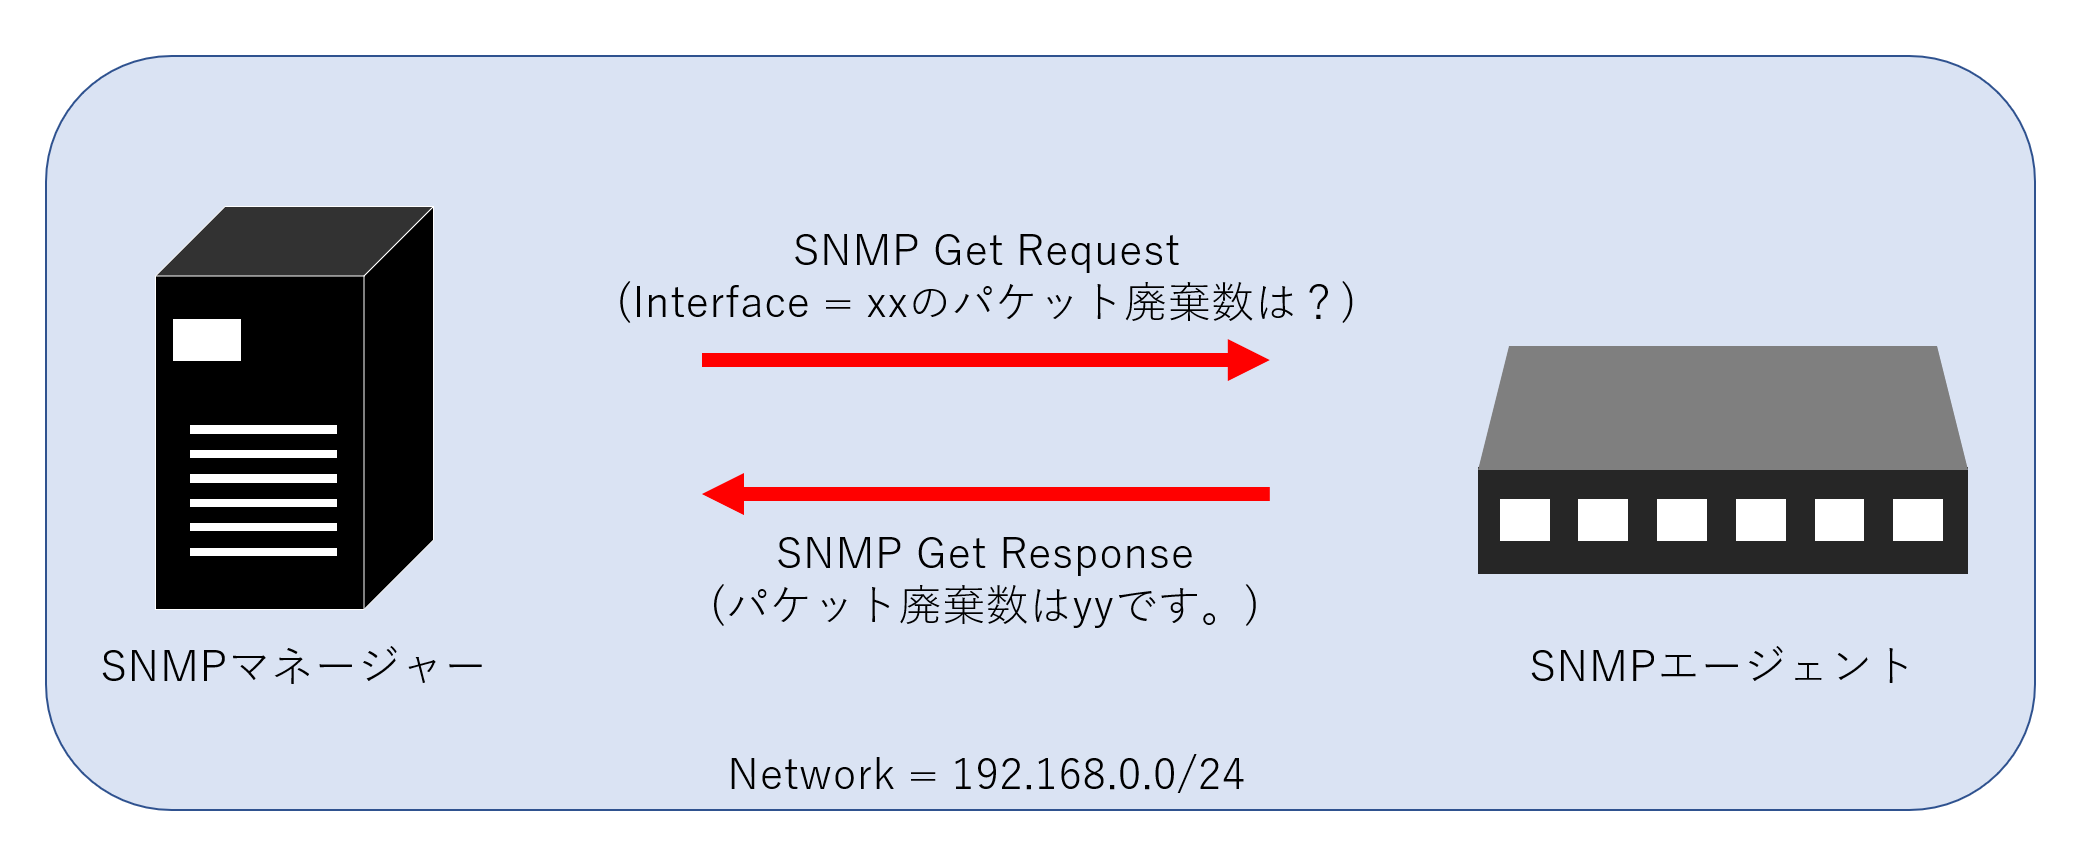 SNMP operation image diagram